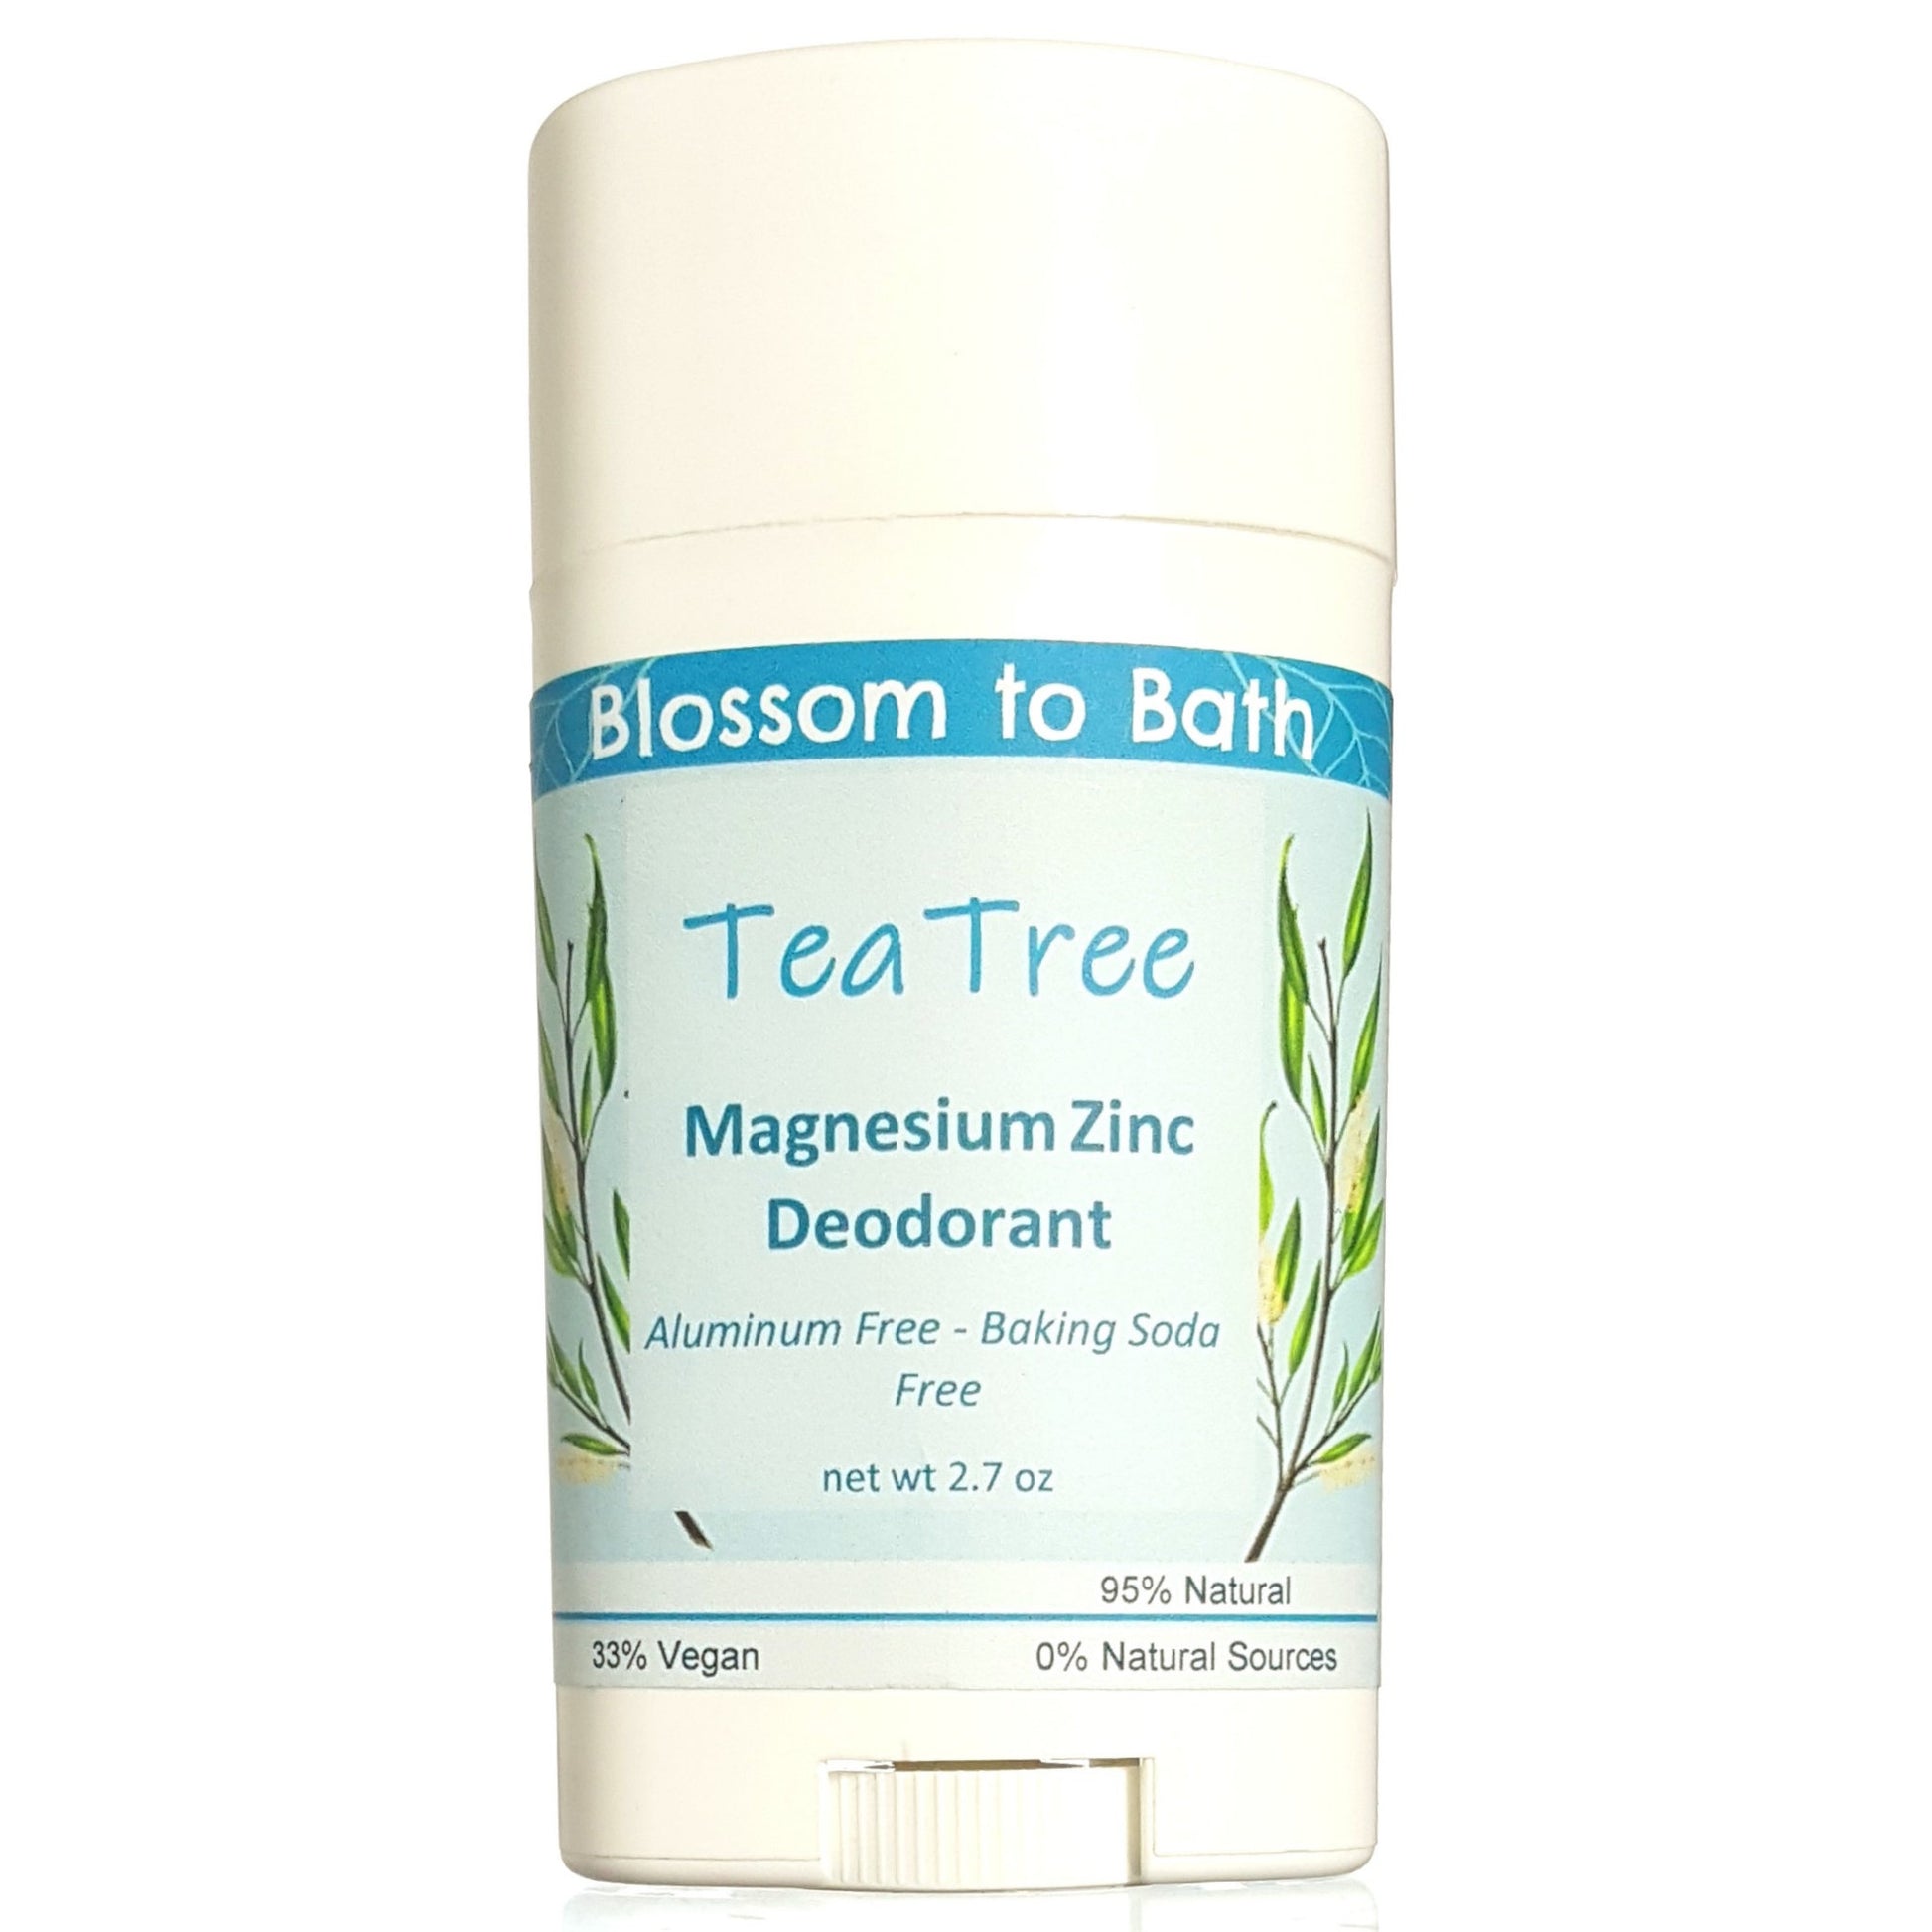 Buy Blossom to Bath Tea Tree Magnesium Zinc Deodorant from Flowersong Soap Studio.  Long lasting protection made from organic botanicals and butters, made without baking soda, tested in the Arizona heat  Tea tree's fresh fragrance embodies a deep down clean.